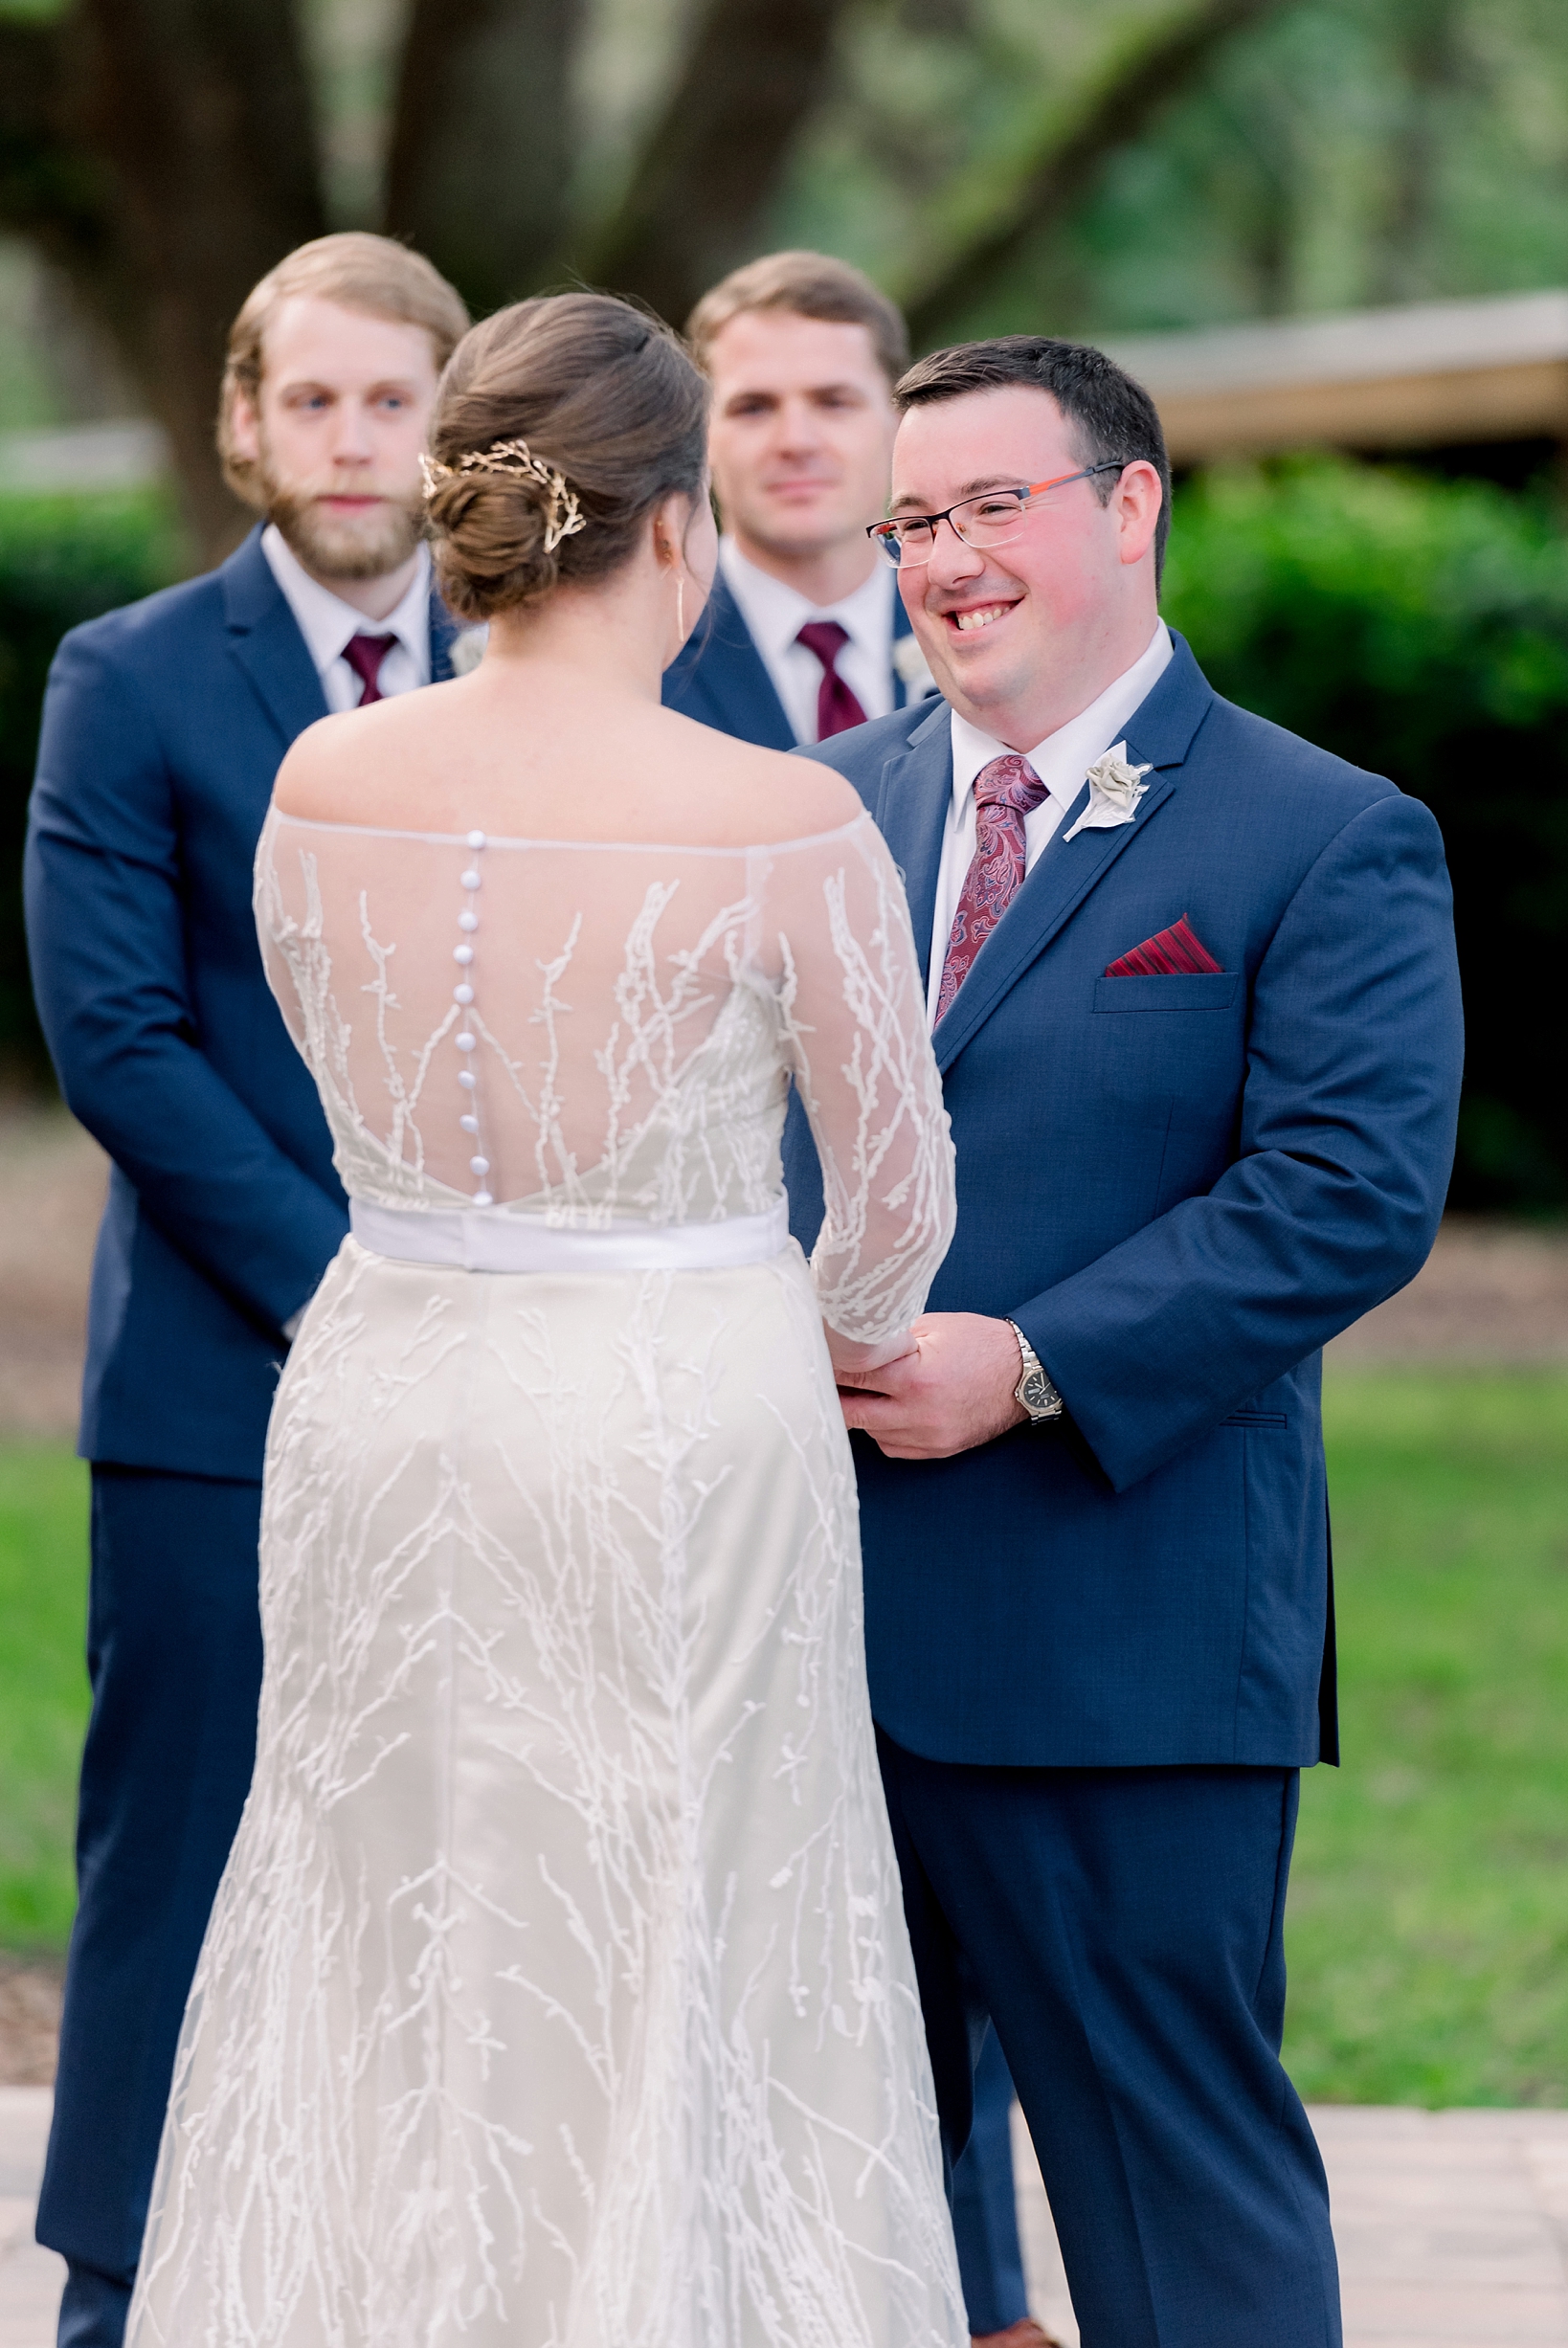 A genuine look from the groom to his bride during the wedding ceremony